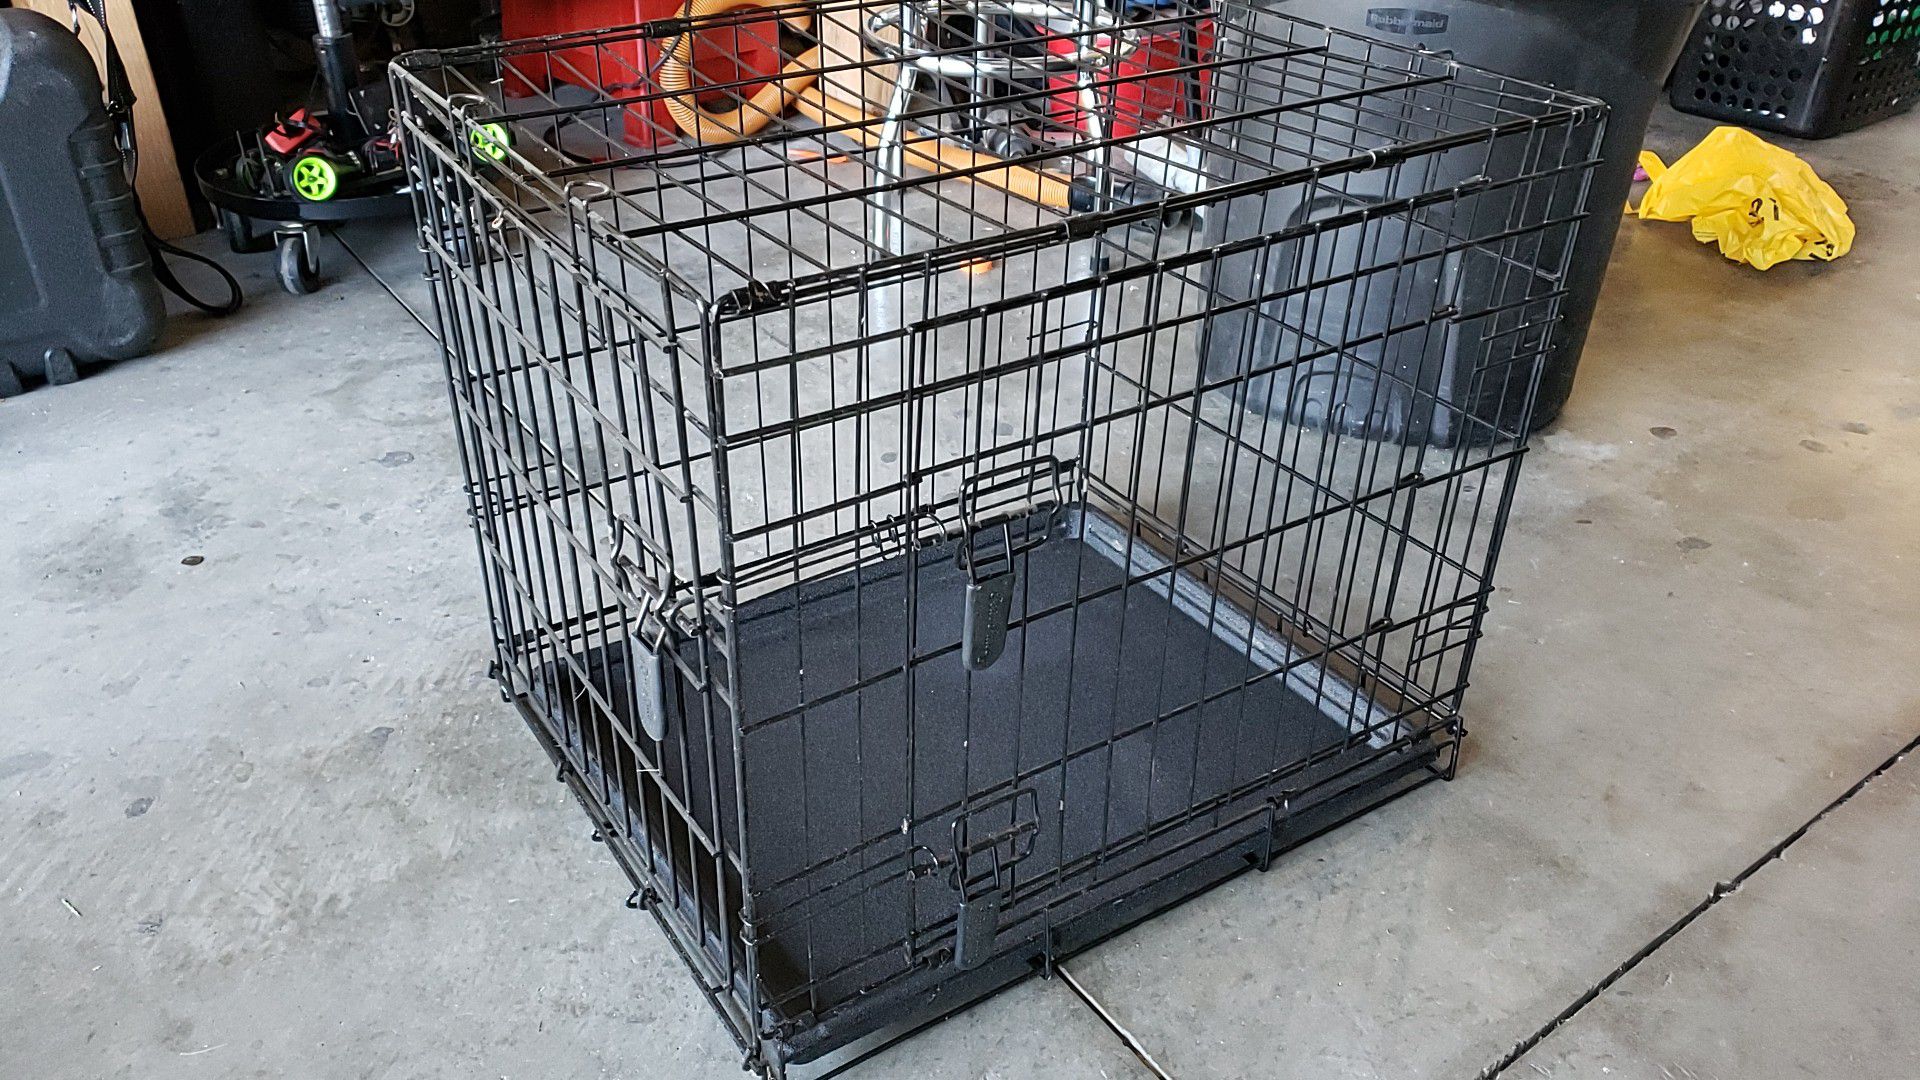 Small dog crate